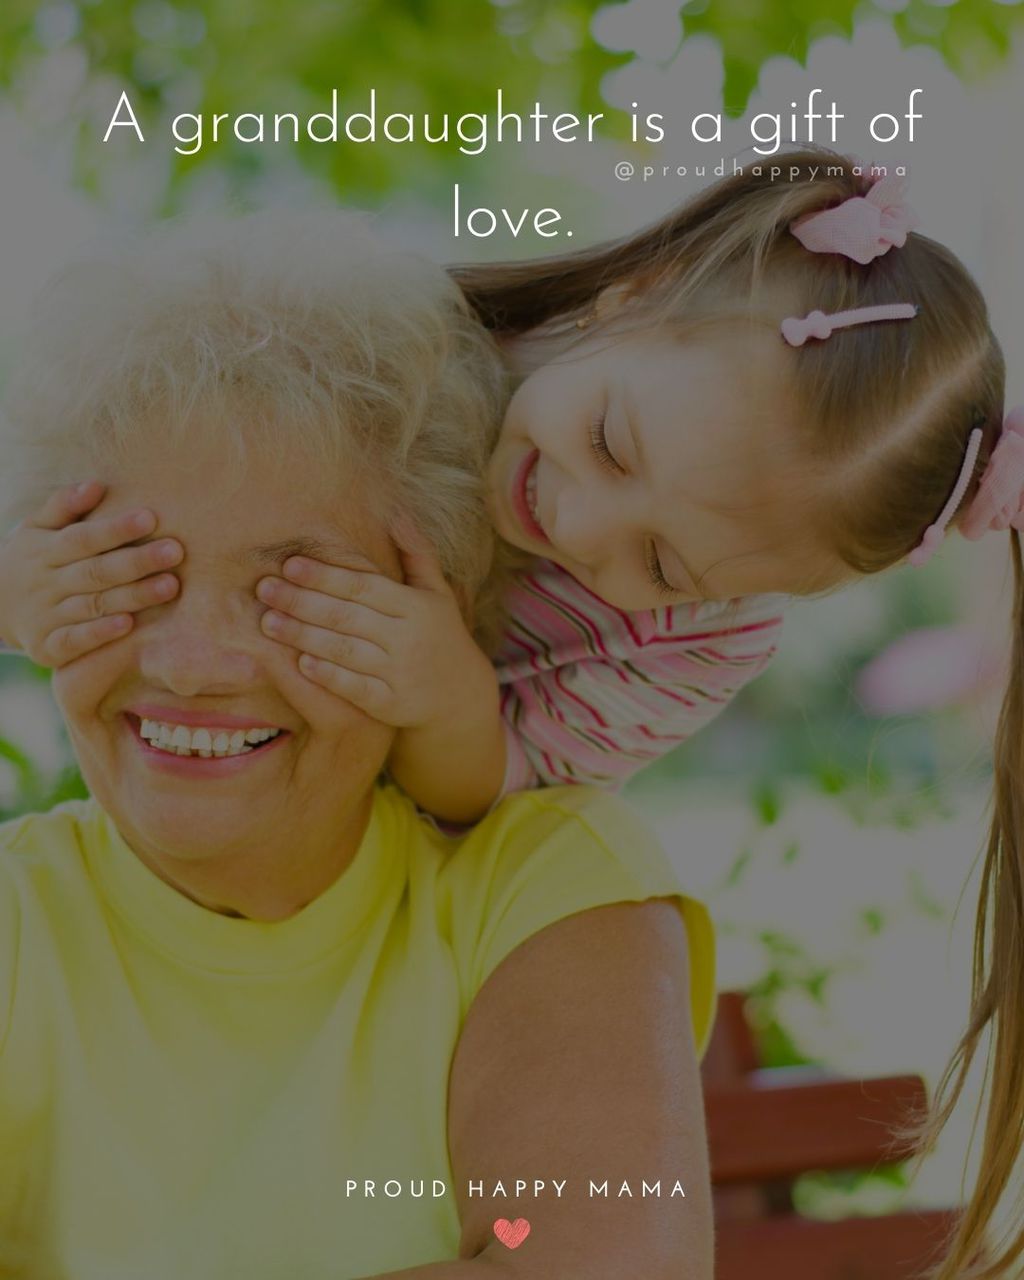 Granddaughter Quotes - A granddaughter is a gift of love.